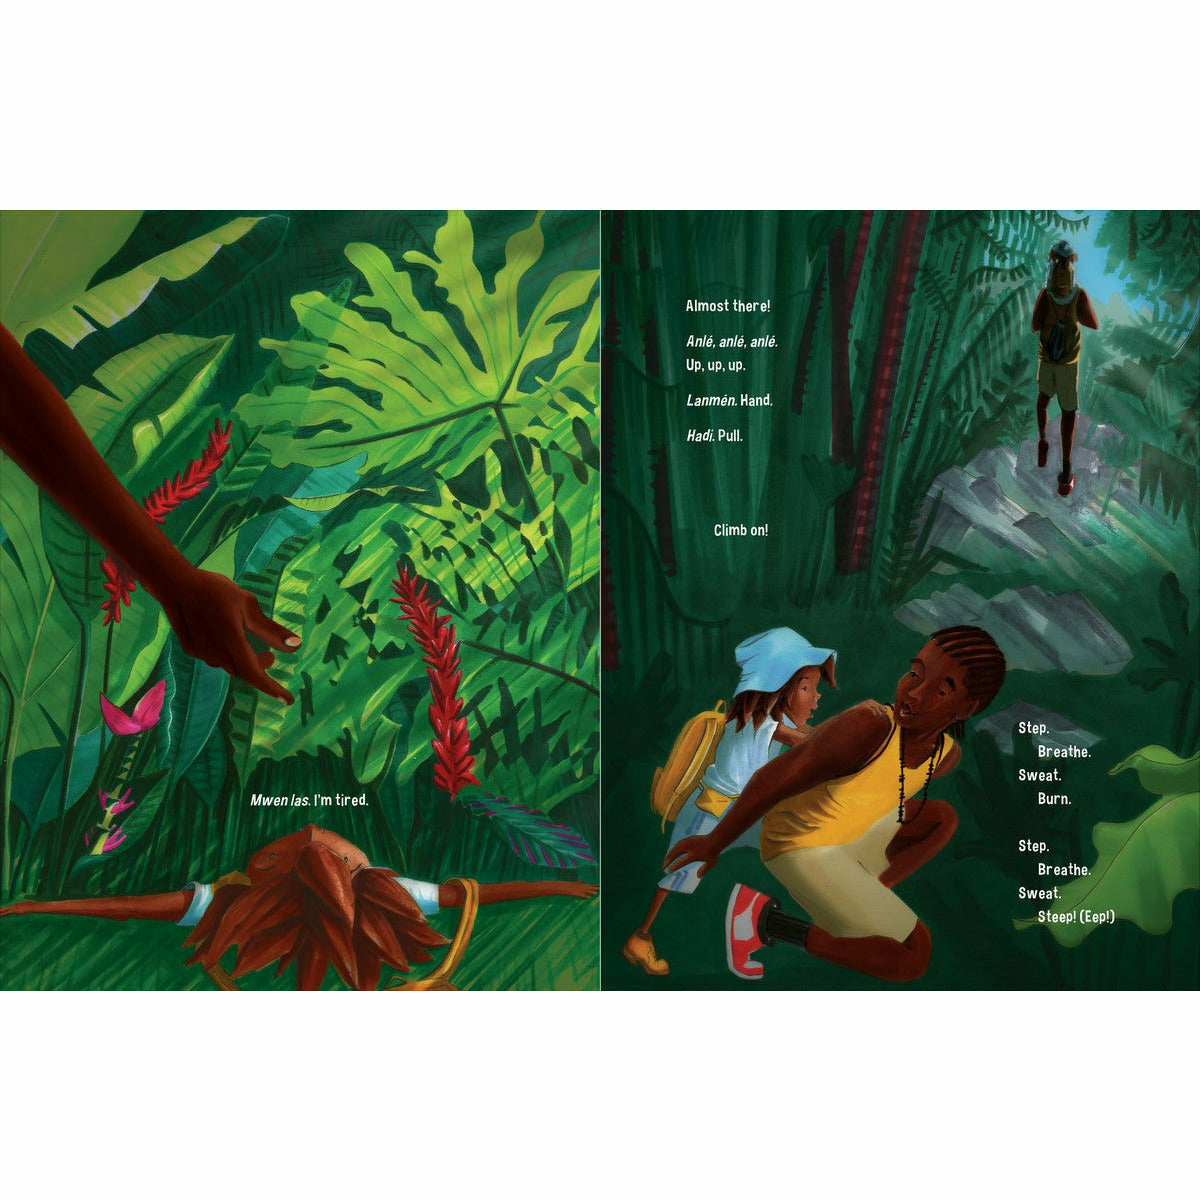 Climb On! by Baptiste Paul, illustrated by Jacqueline Alcántara, front cover of a childrens picture book the image is of a father and daughter climbing a mountain in a tropical setting. Father is going to help his daughter continue to the top 